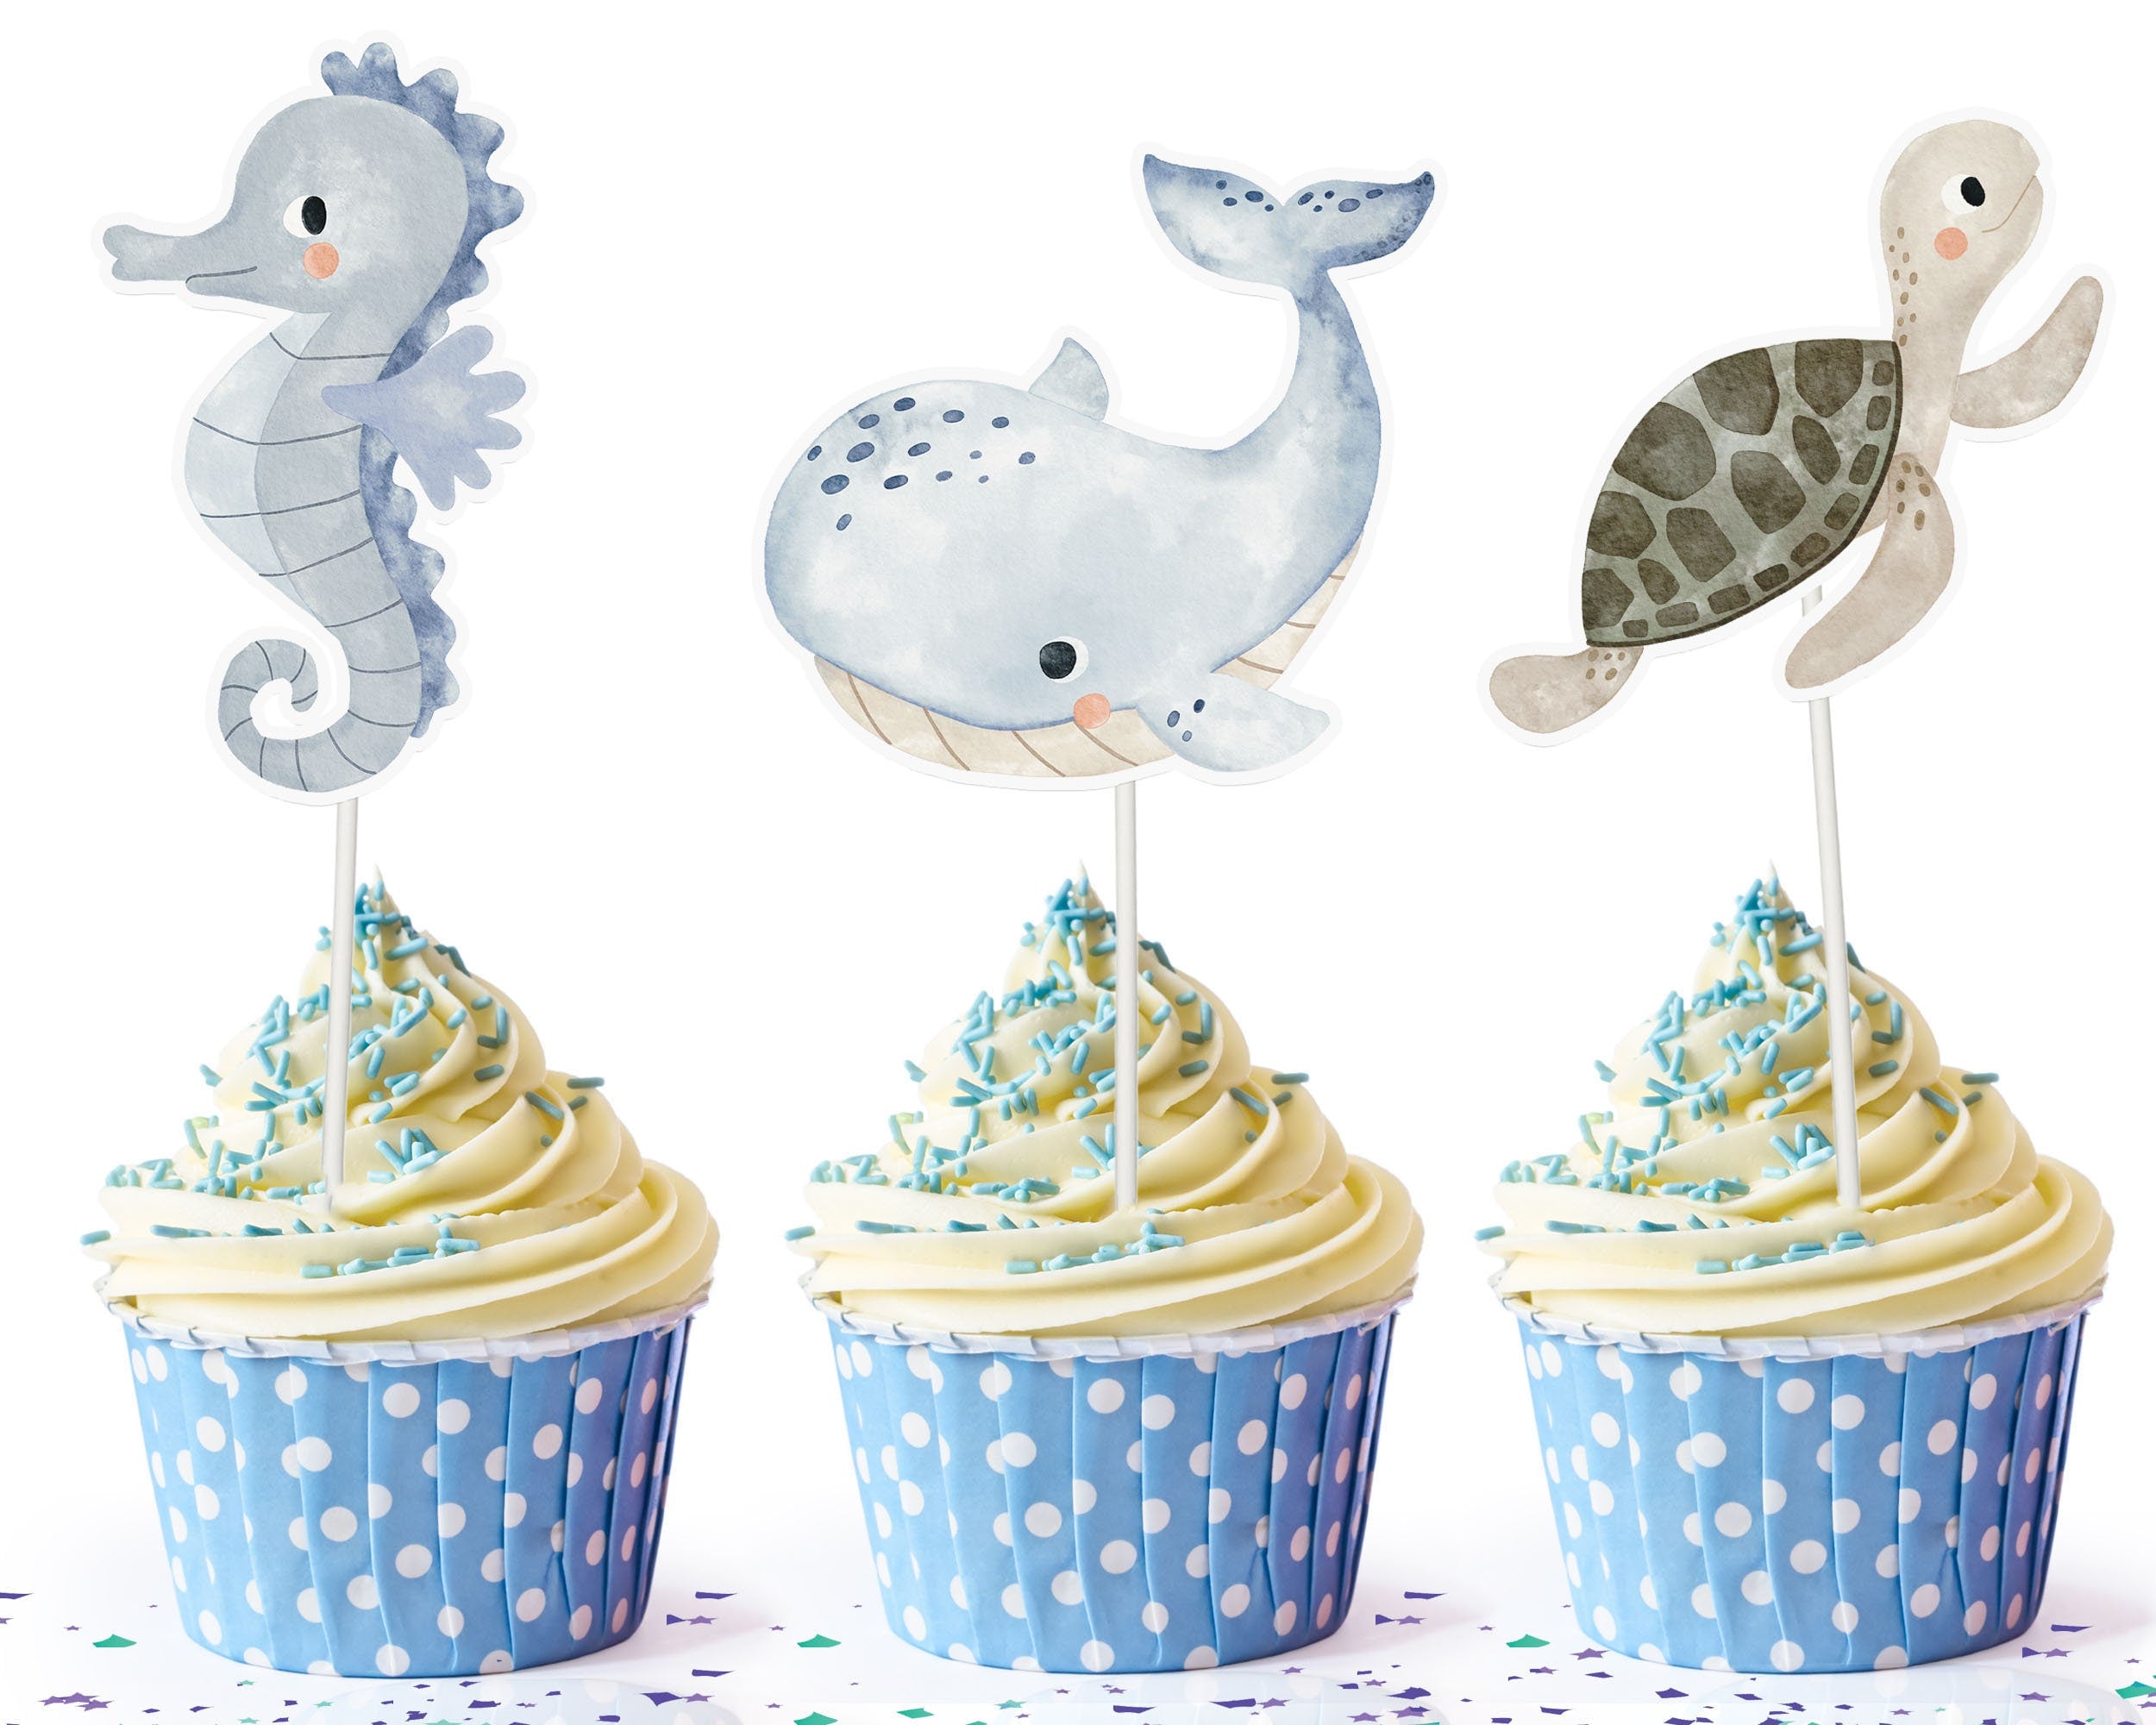 Enchanting Under the Sea Cupcake Toppers - Ocean Adventure Party Decor